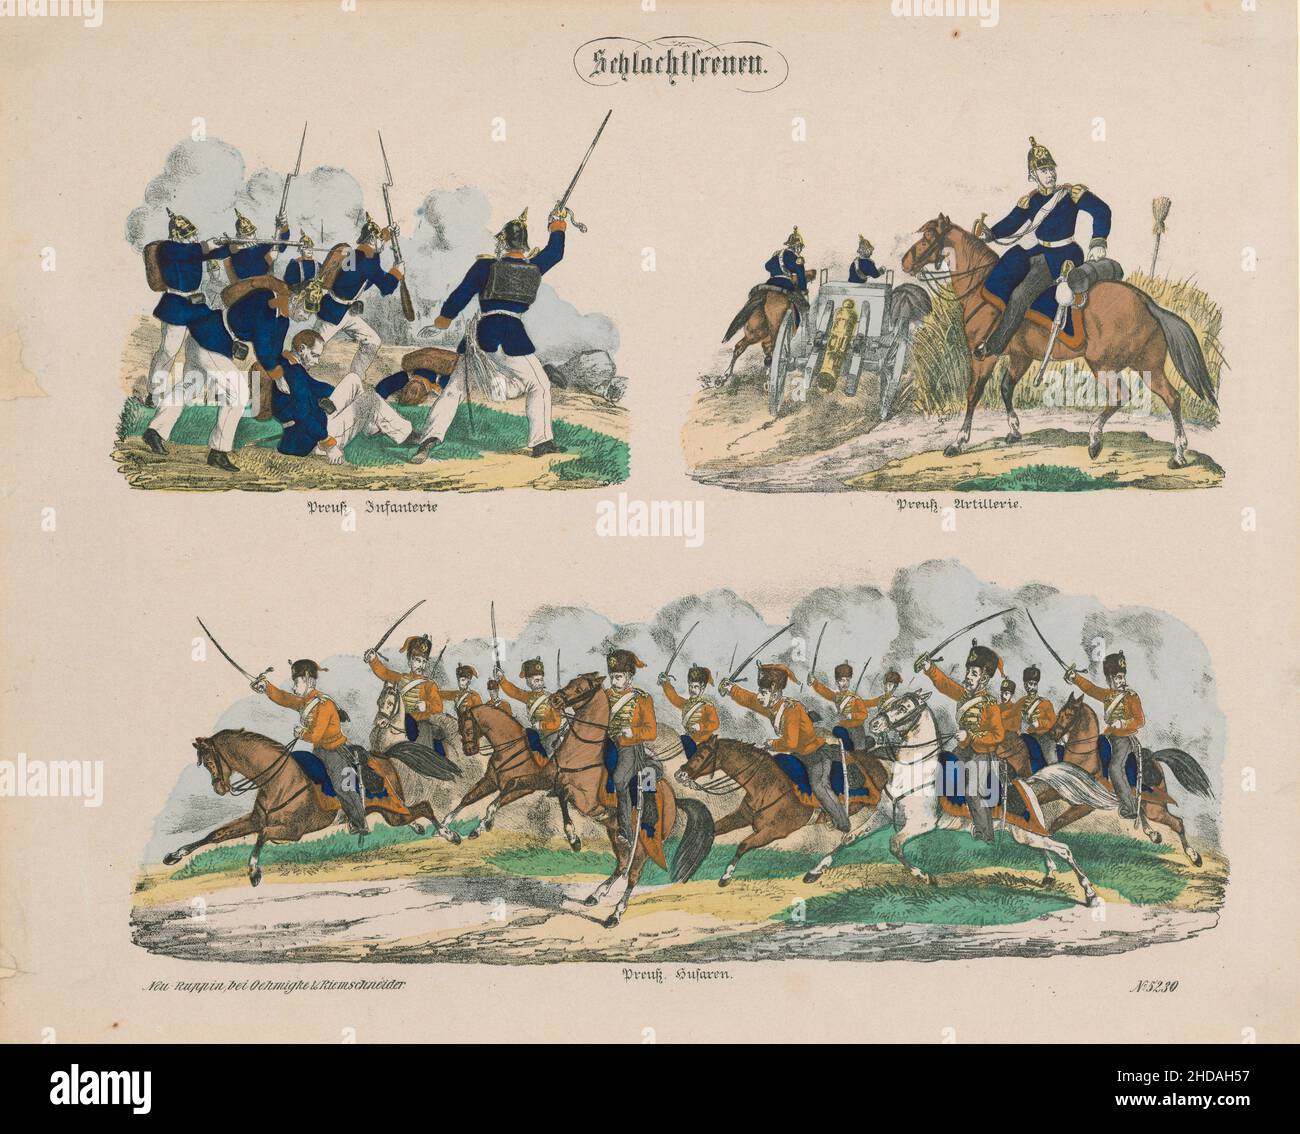 Vintage lithography: Prussian army in Battle scenes. 1866 Prussian infantery, Prussian artillery, Prussian hussars Stock Photo